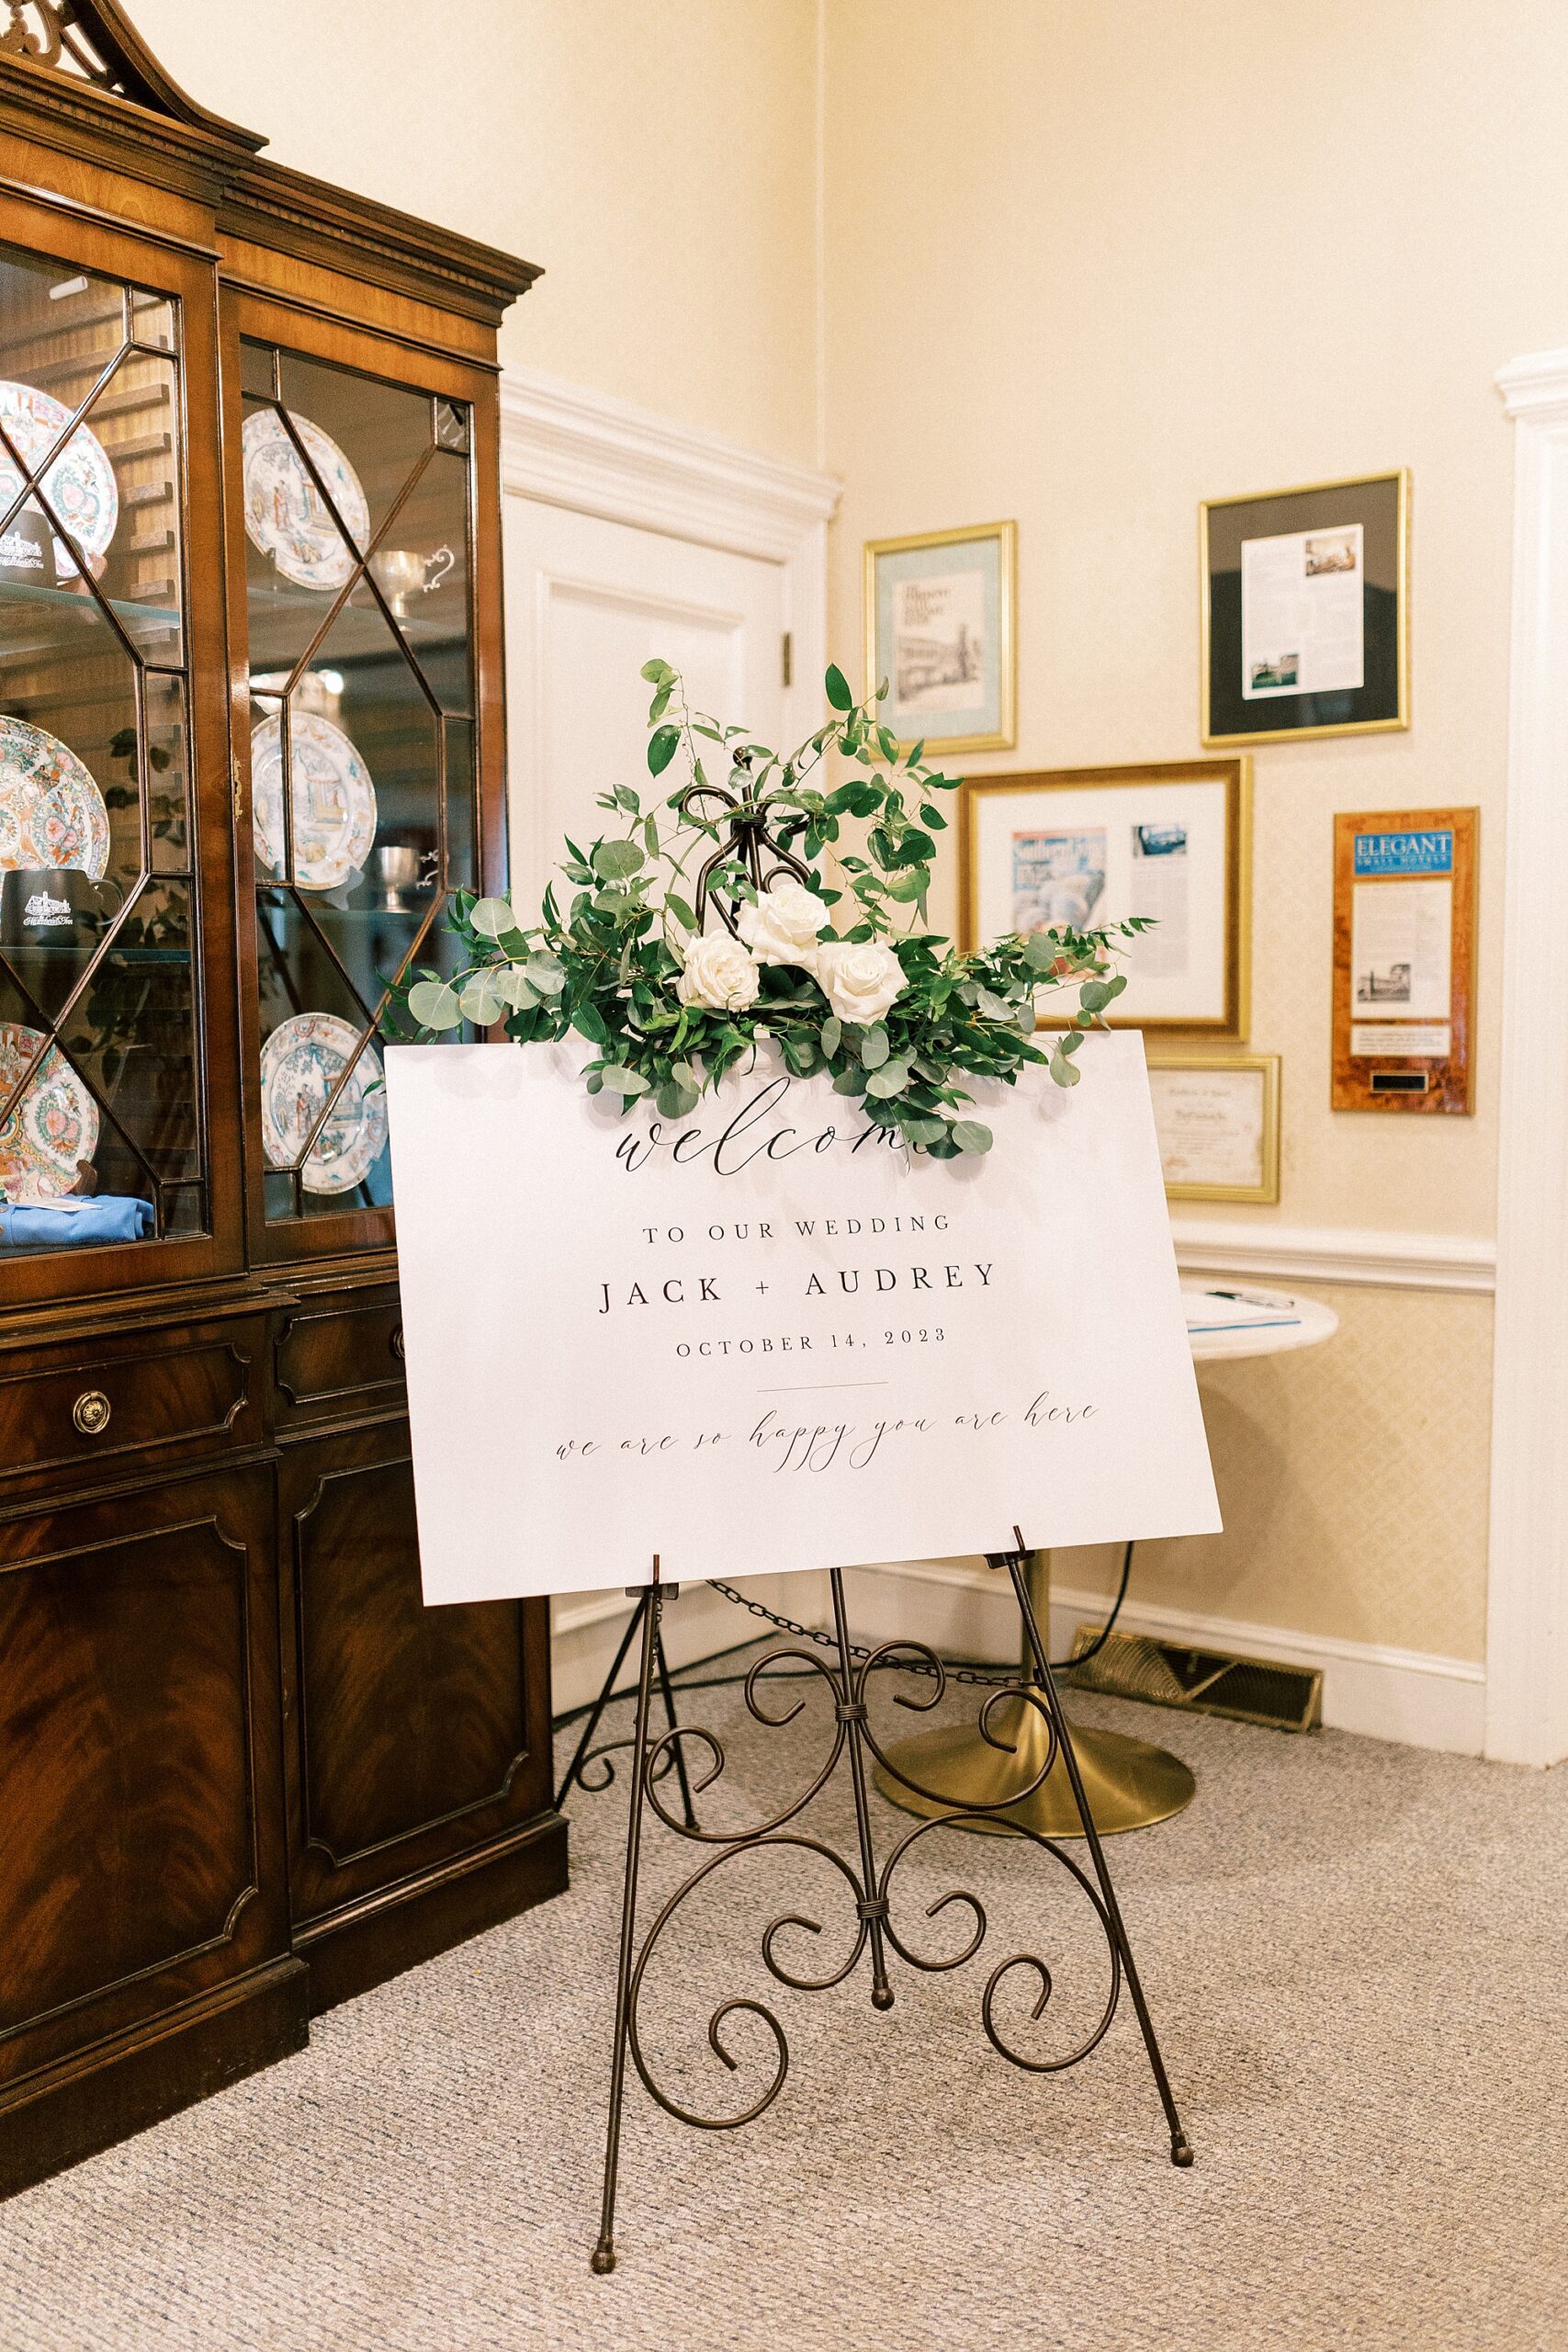 welcome sign for NC wedding reception at the Morehead Inn